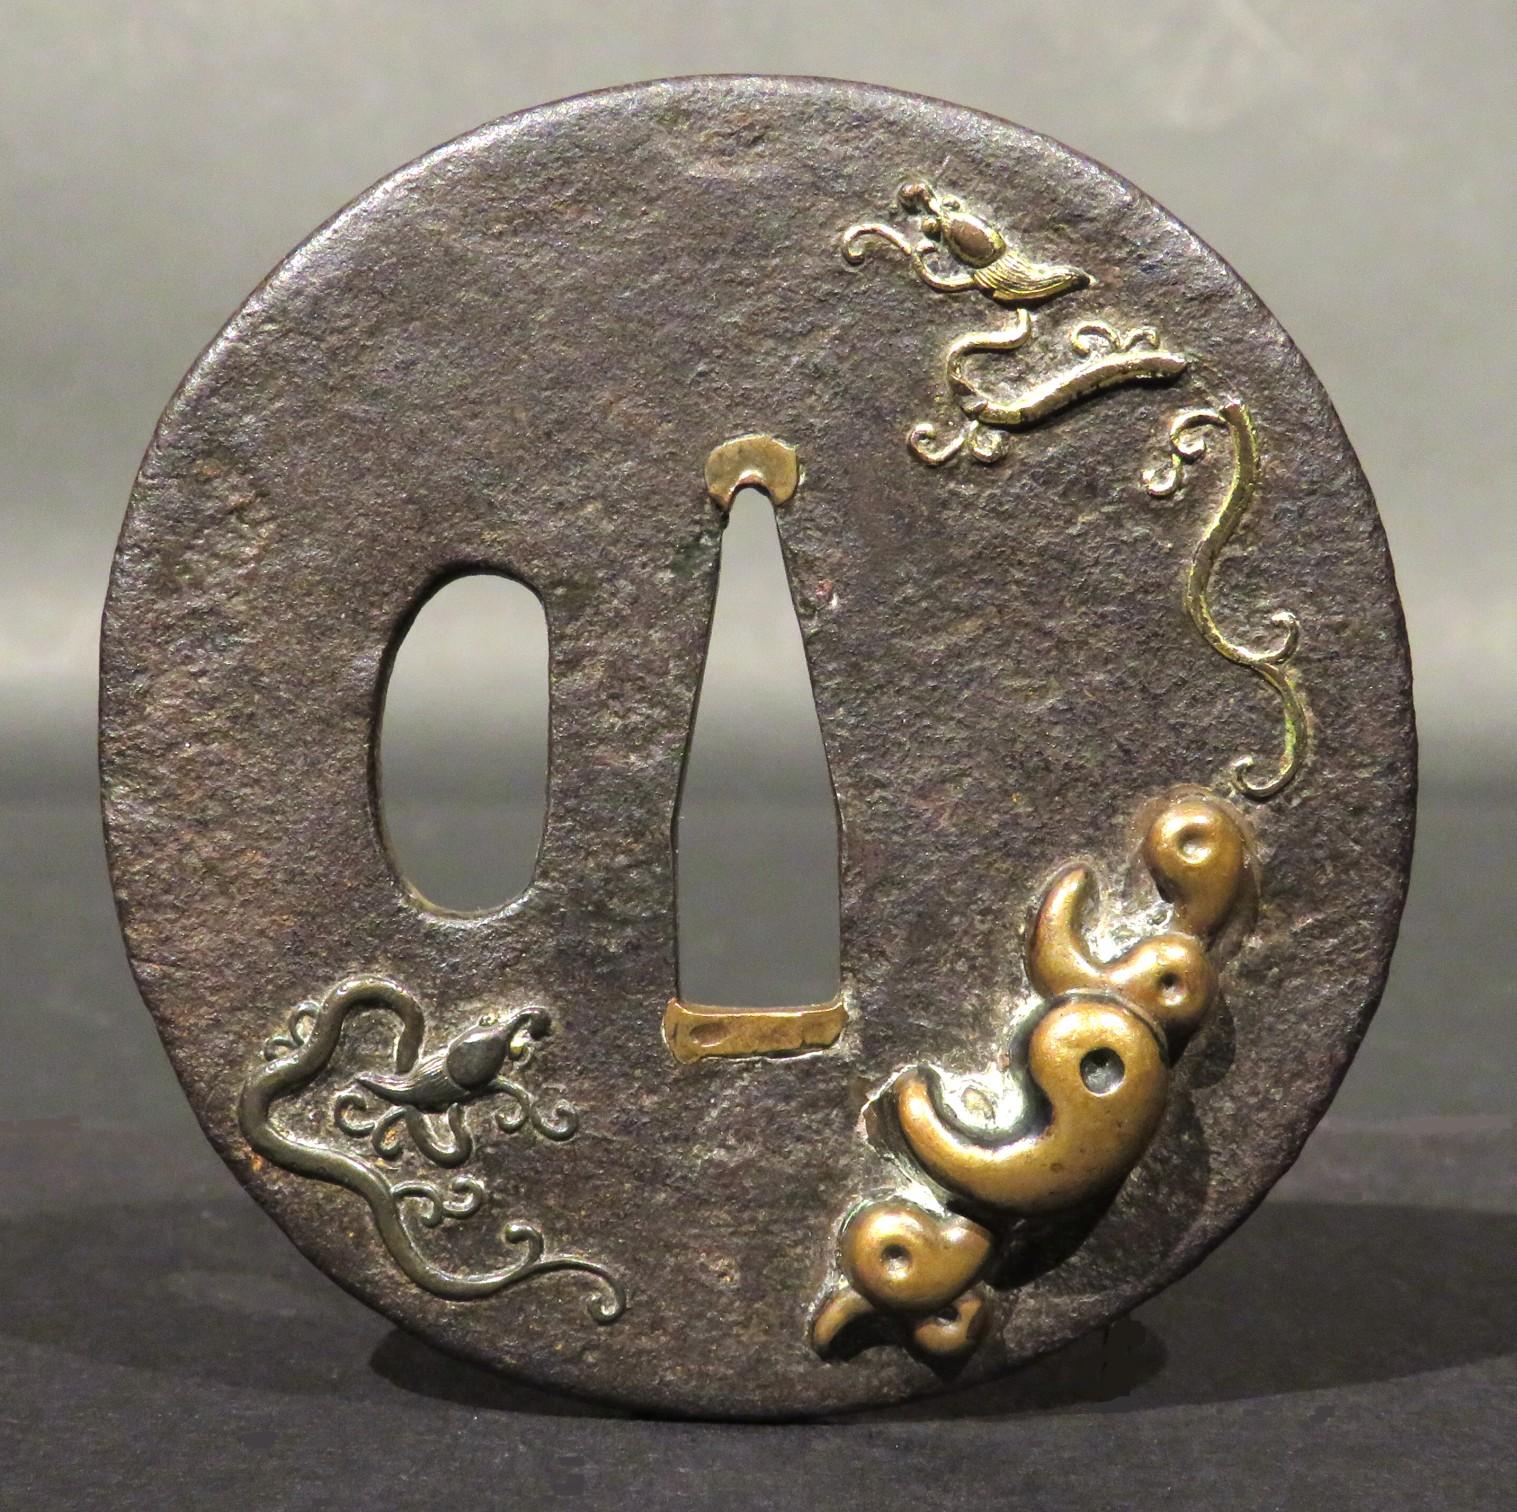 A finely decorated iron & mixed metal tsuba, showing a dark-brown iron ground decorated in low relief with organic inspired motifs in gold, silver & copper.